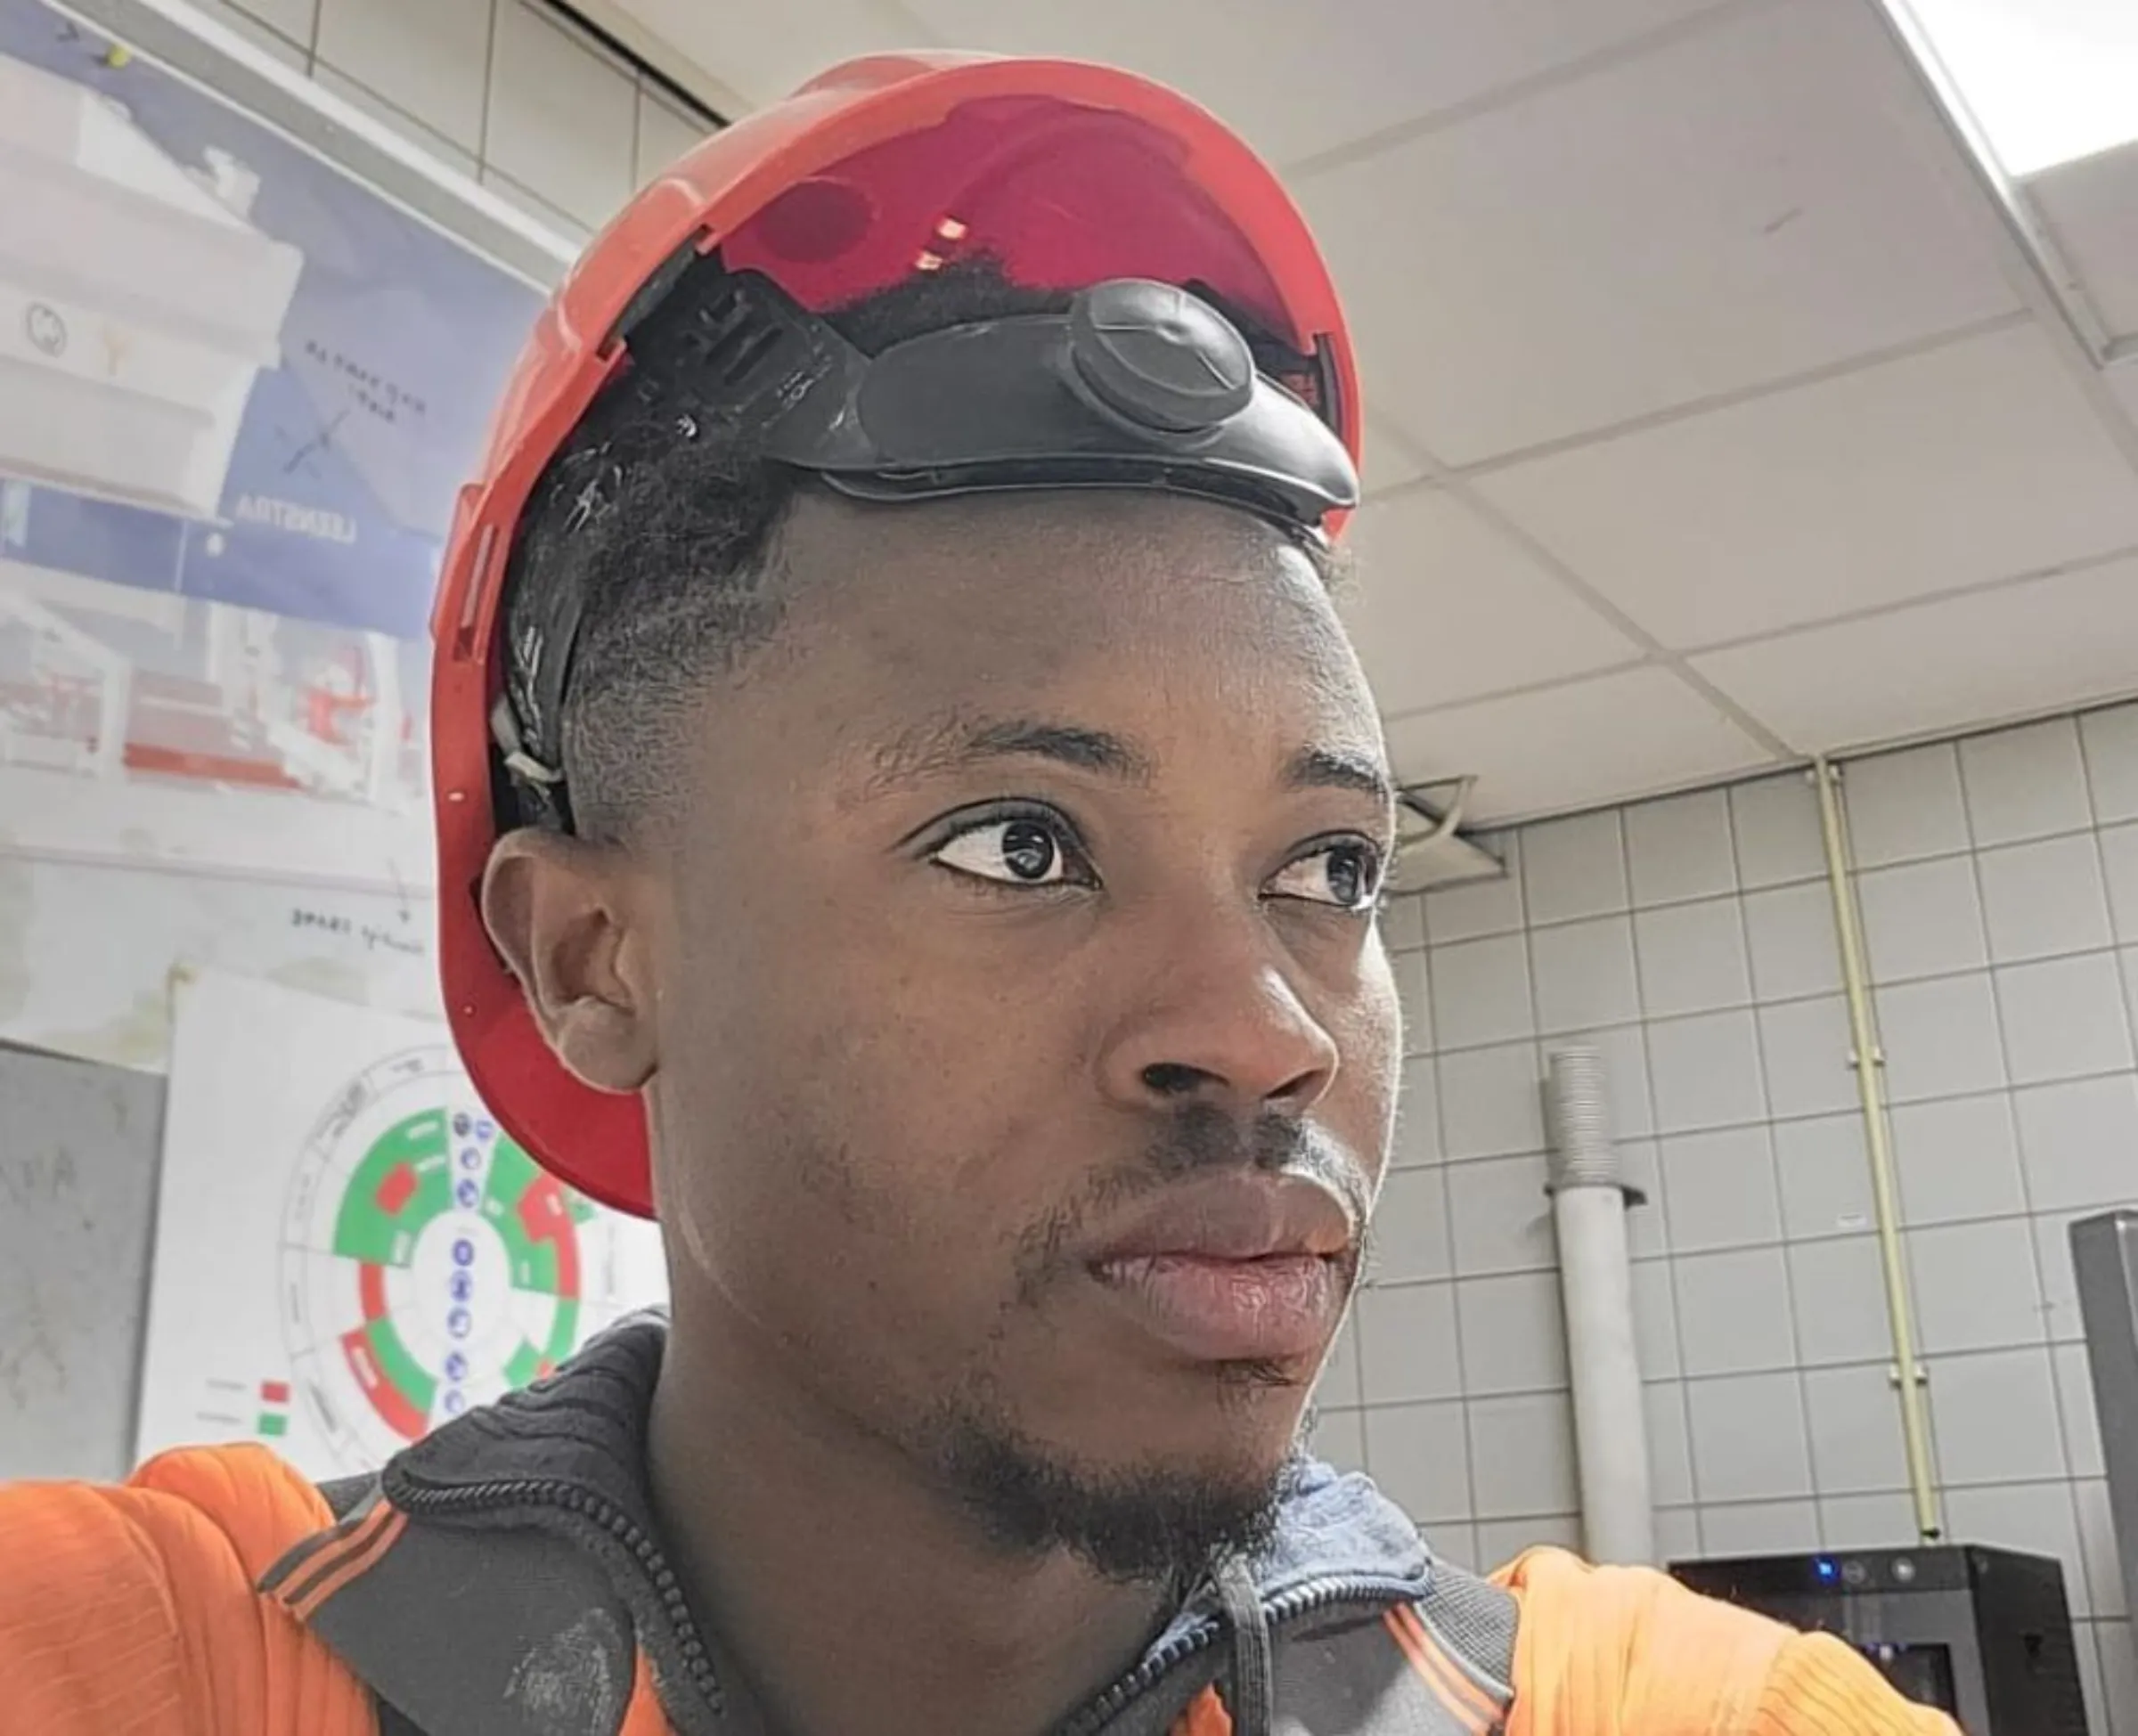 Ghanaian medical student Kumi Bright fled Ukraine when the war started and is currently working for a construction company in the Netherlands so he can save money to resume his education